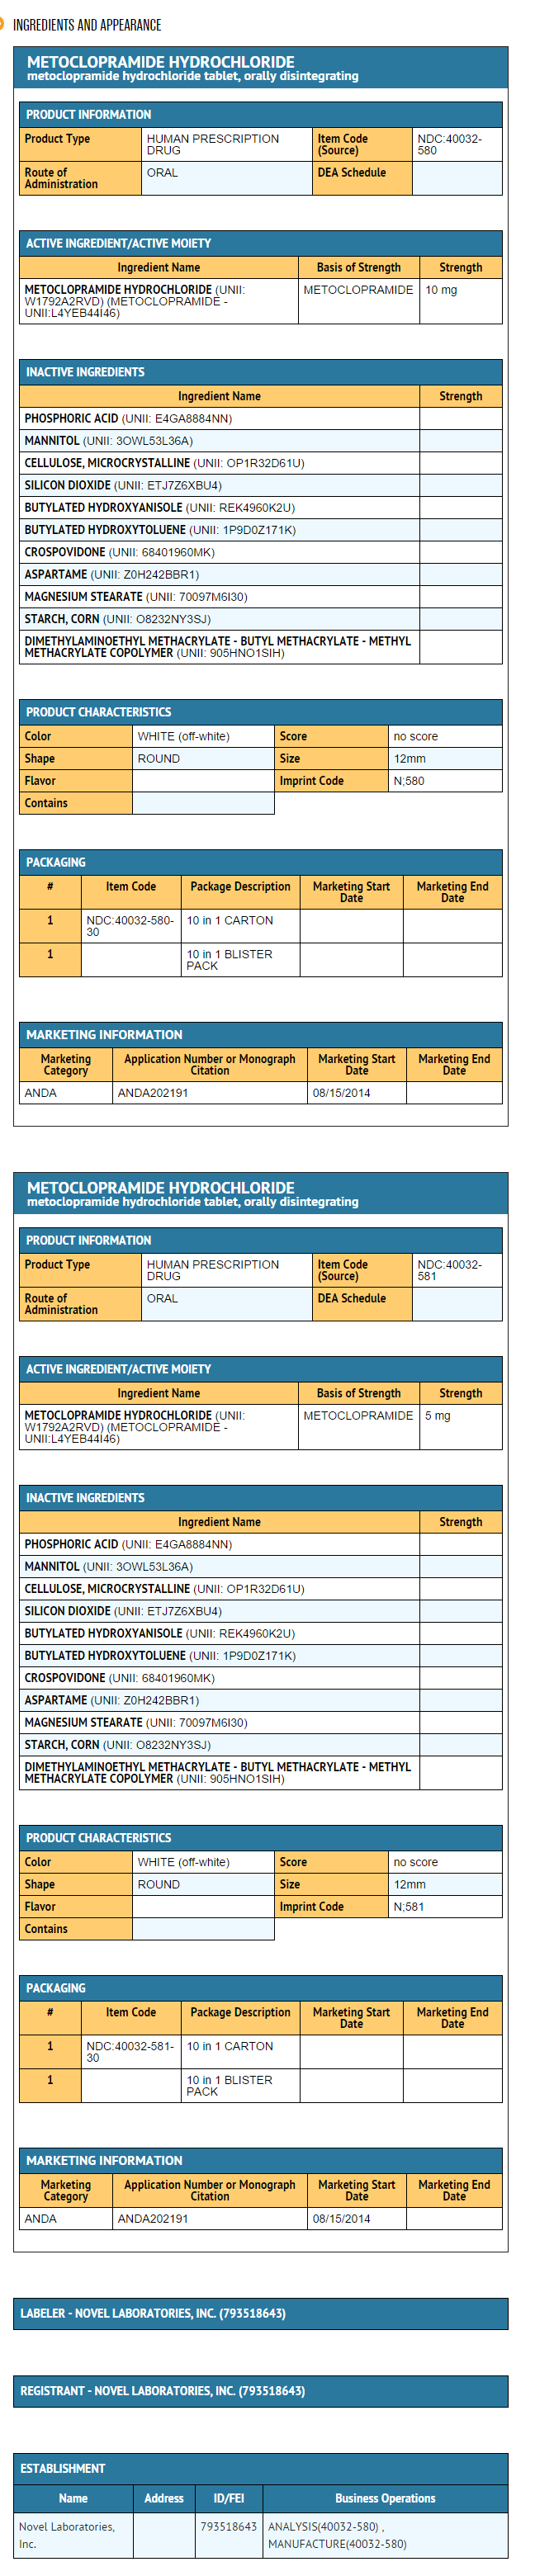 File:Metoclopramide ingredients and appearance.png